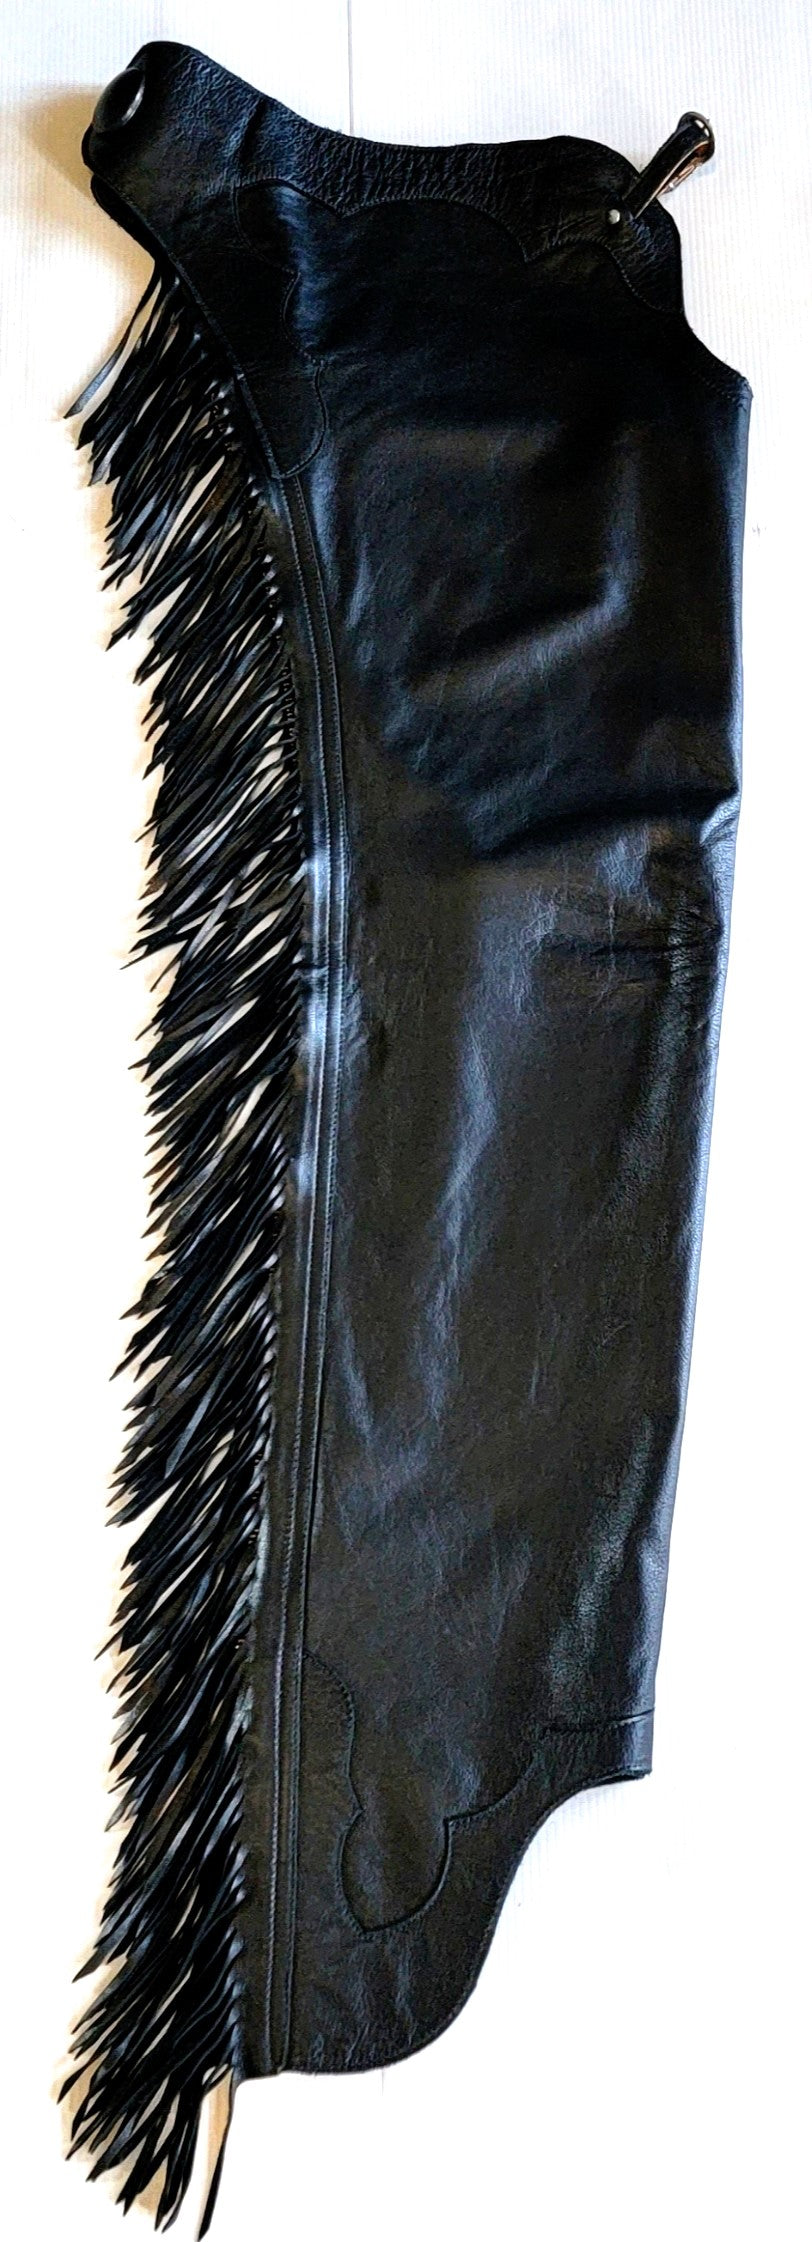 1 == Adult Medium Long Smooth Leather Black Chaps